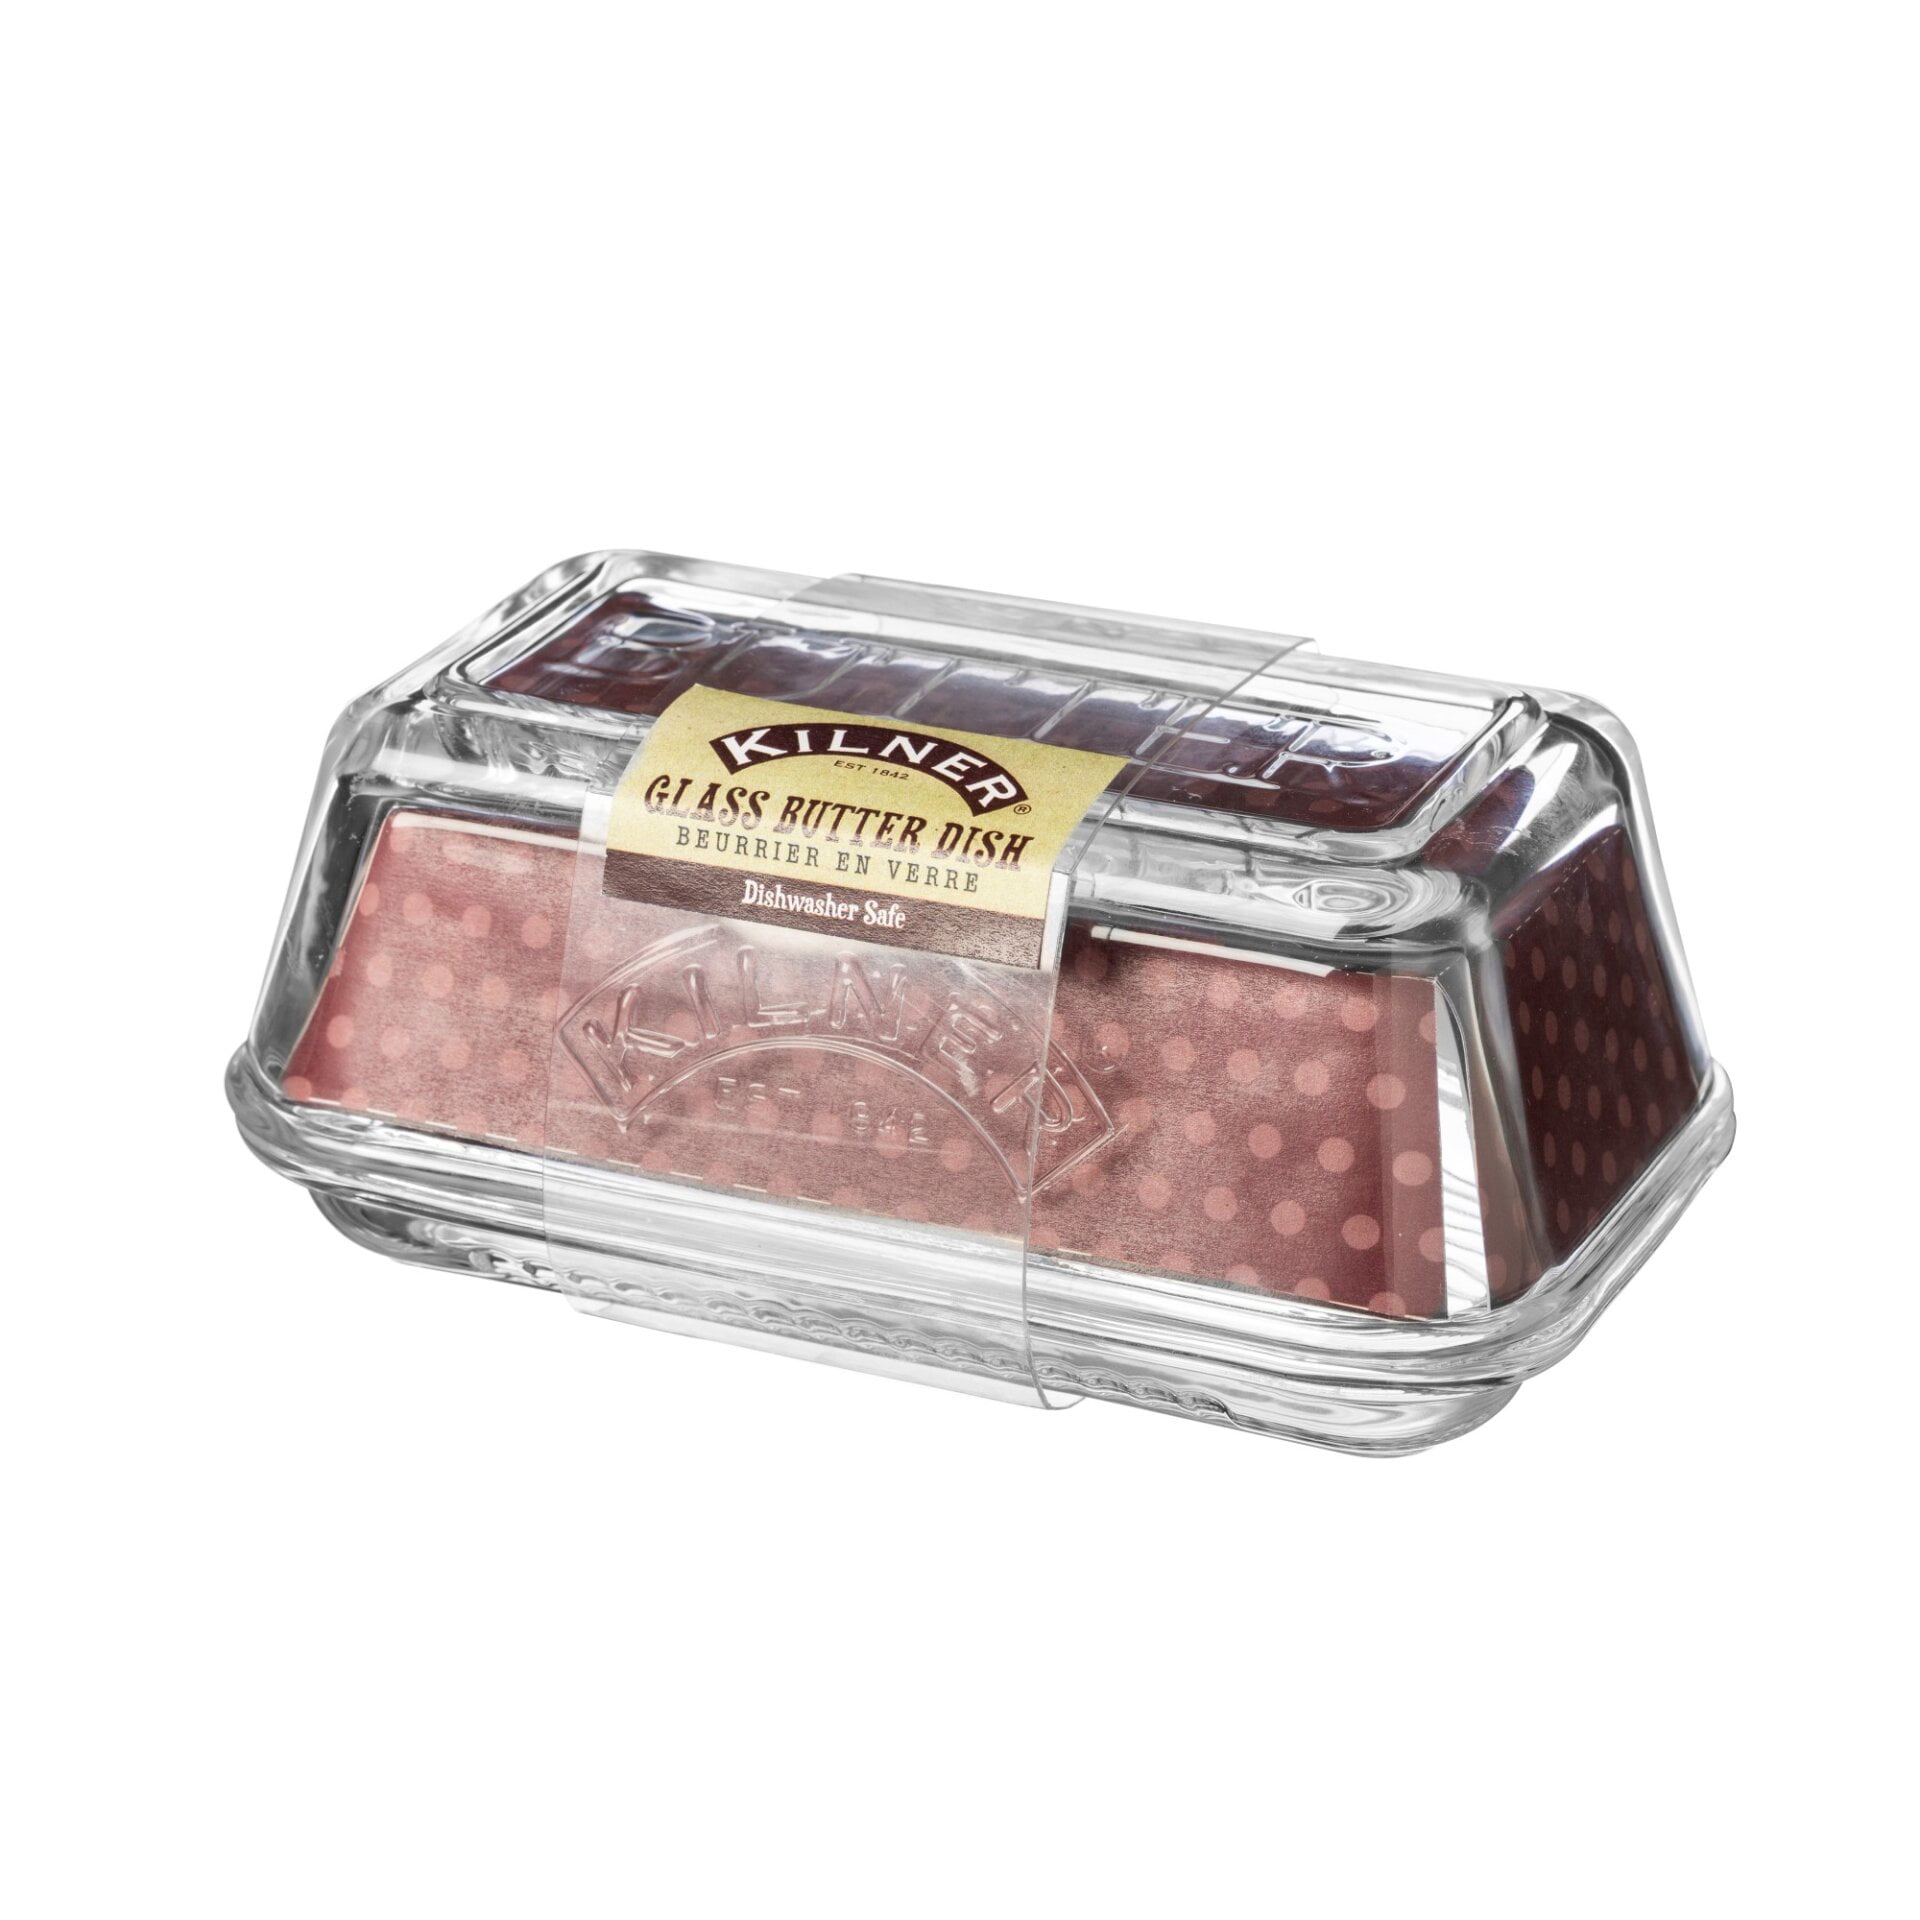 Kilner Glass Storage Serving Cheese or Butter Dish With Lid 0025.350 for sale online 